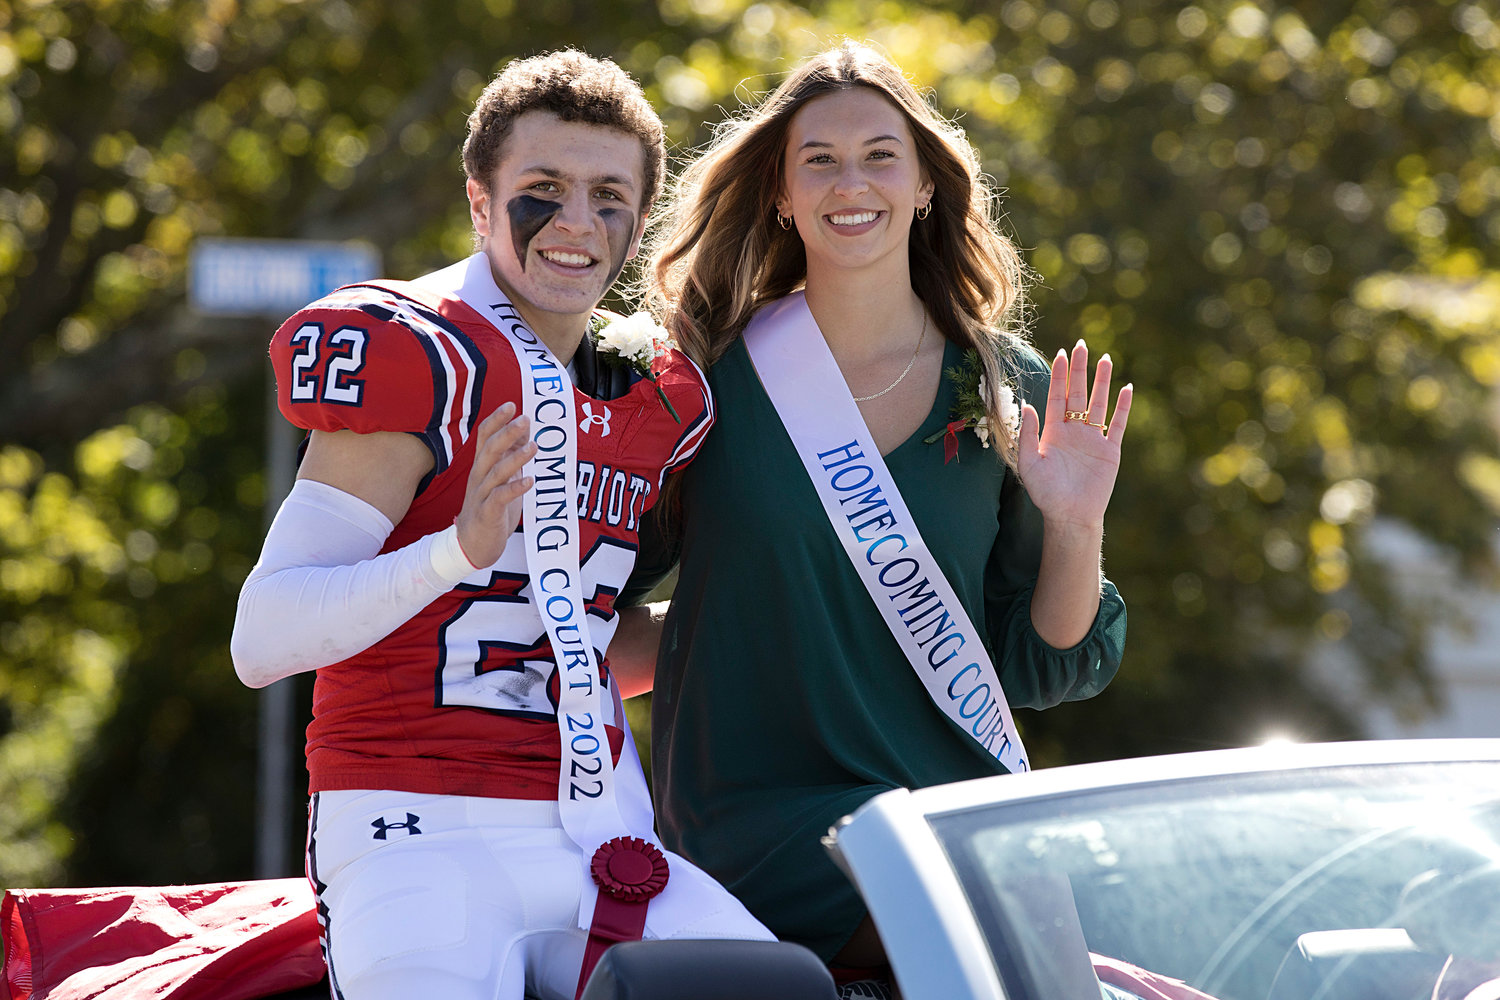 Dylan Brandariz and Ava Hackley, members of the Homecoming Court, wave to the crowd.